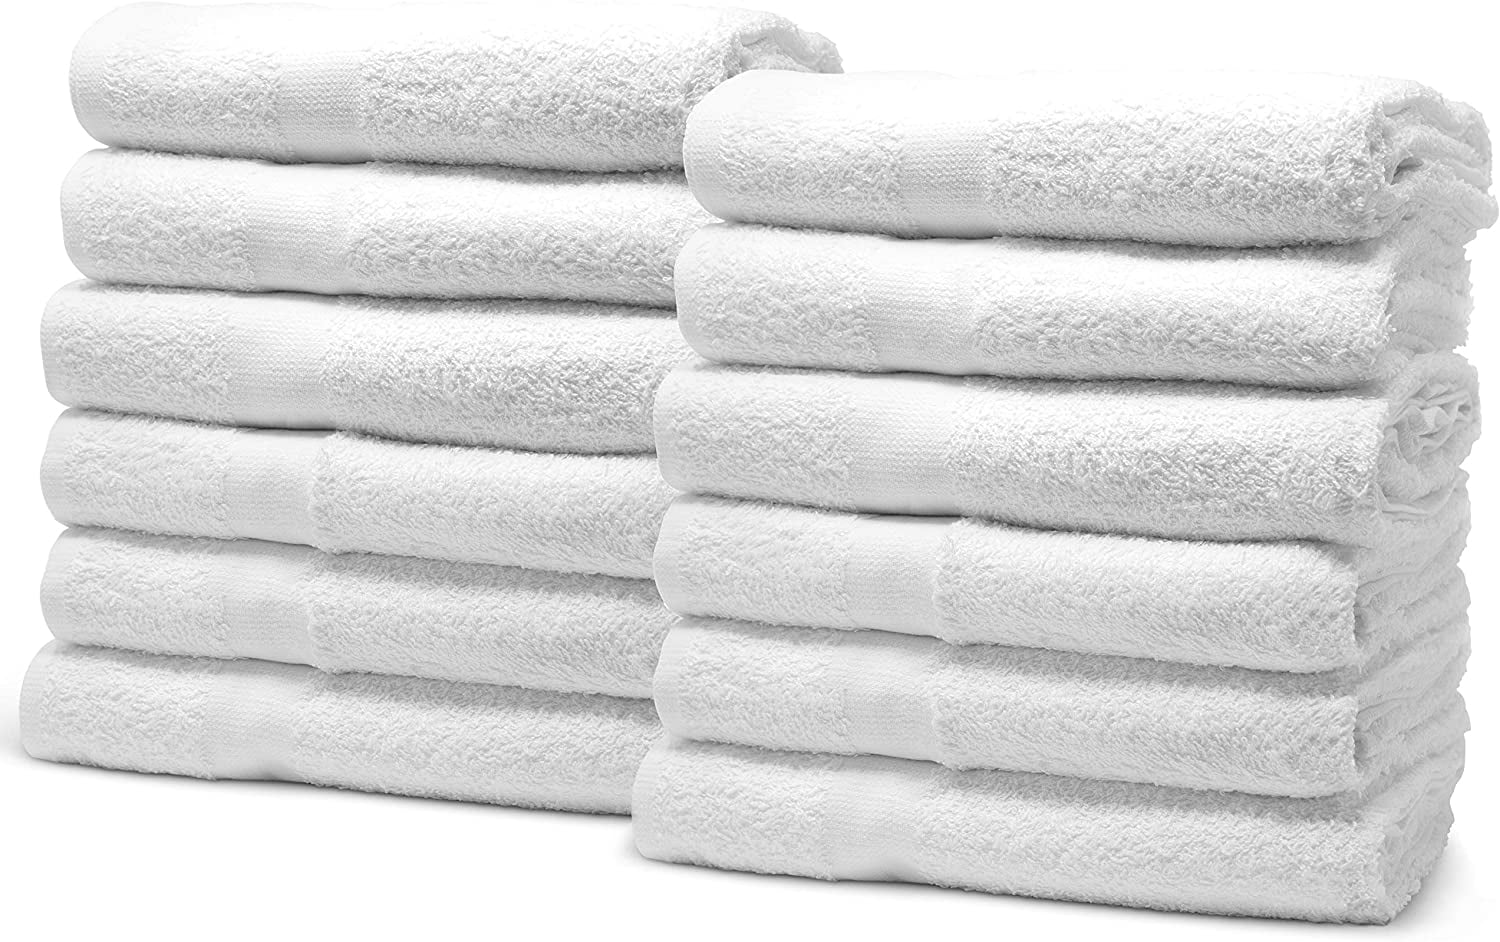 Wealuxe Cotton Bath Towels - 22x44 inch - Small and Lightweight - 6 Pack - White, Size: 22 x 44